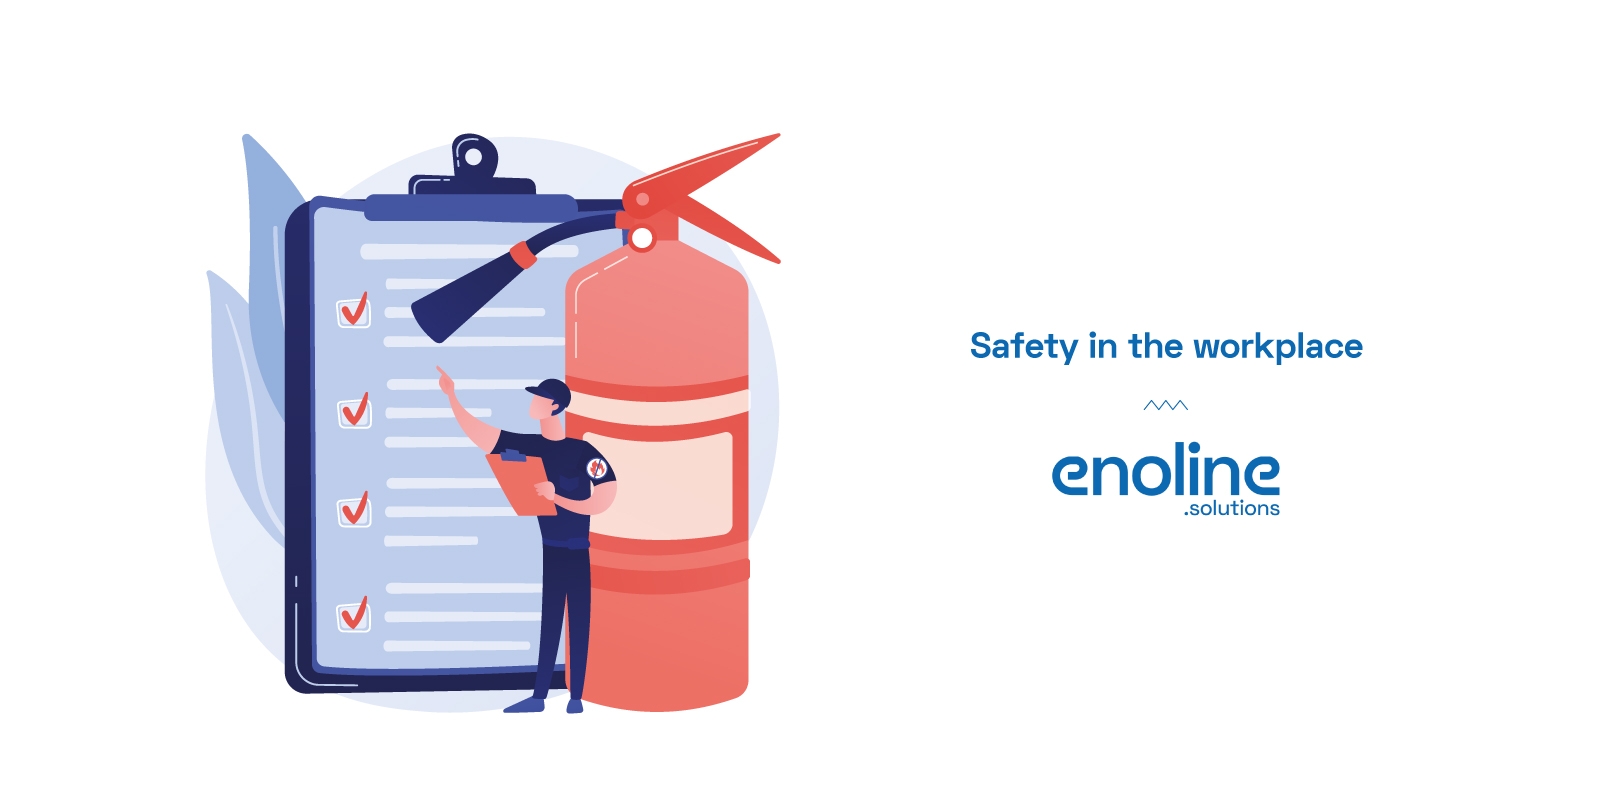 Safety in the workplace enoline